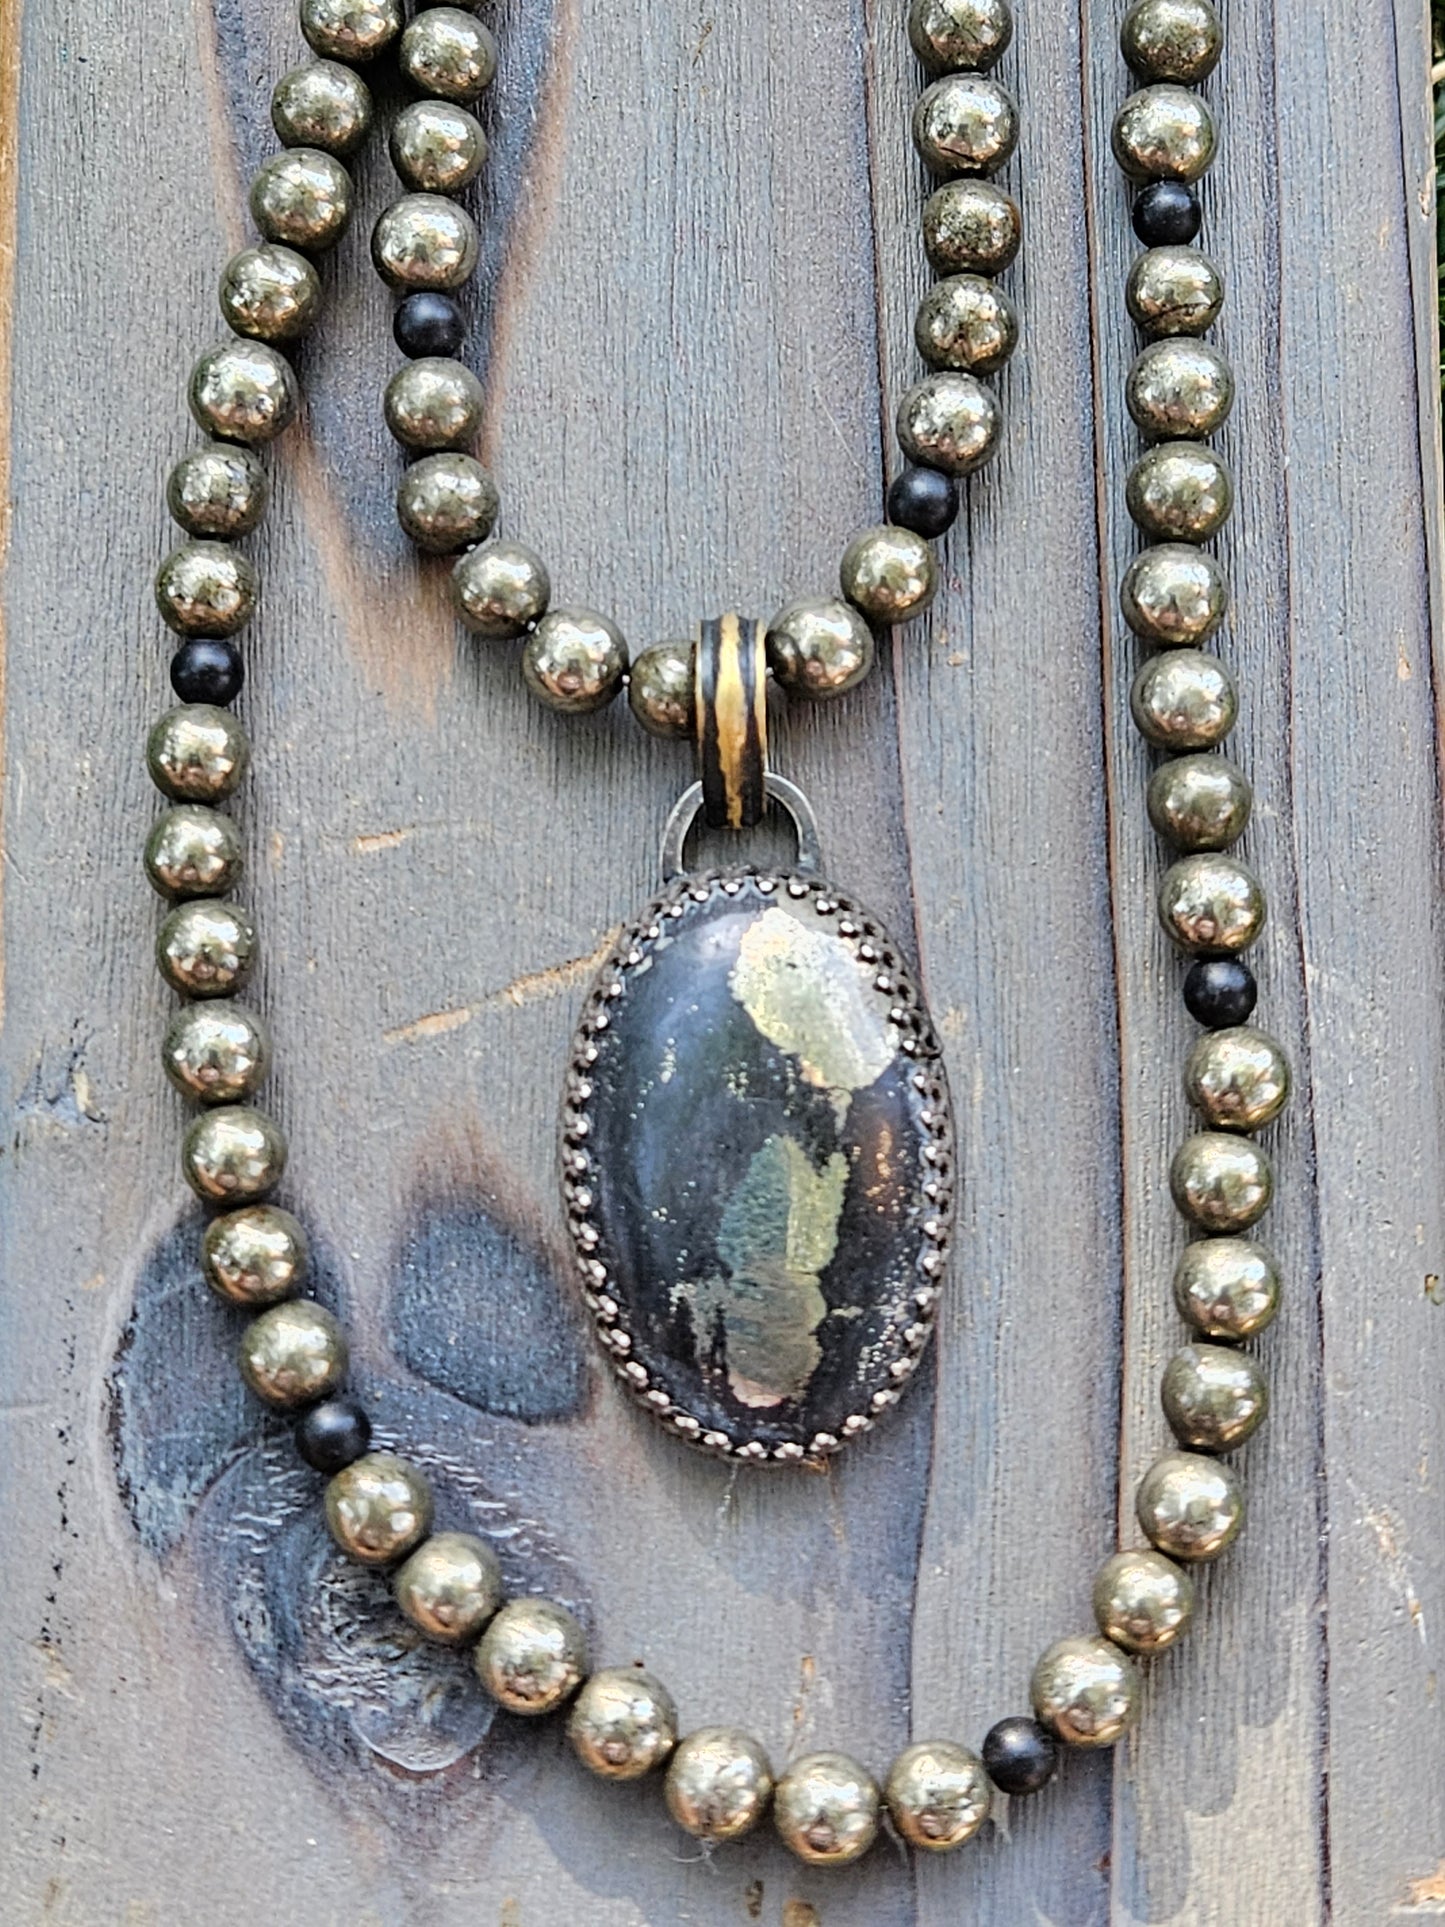 Pyrite and Shungite Layered Necklace with Apache Gold Pendant